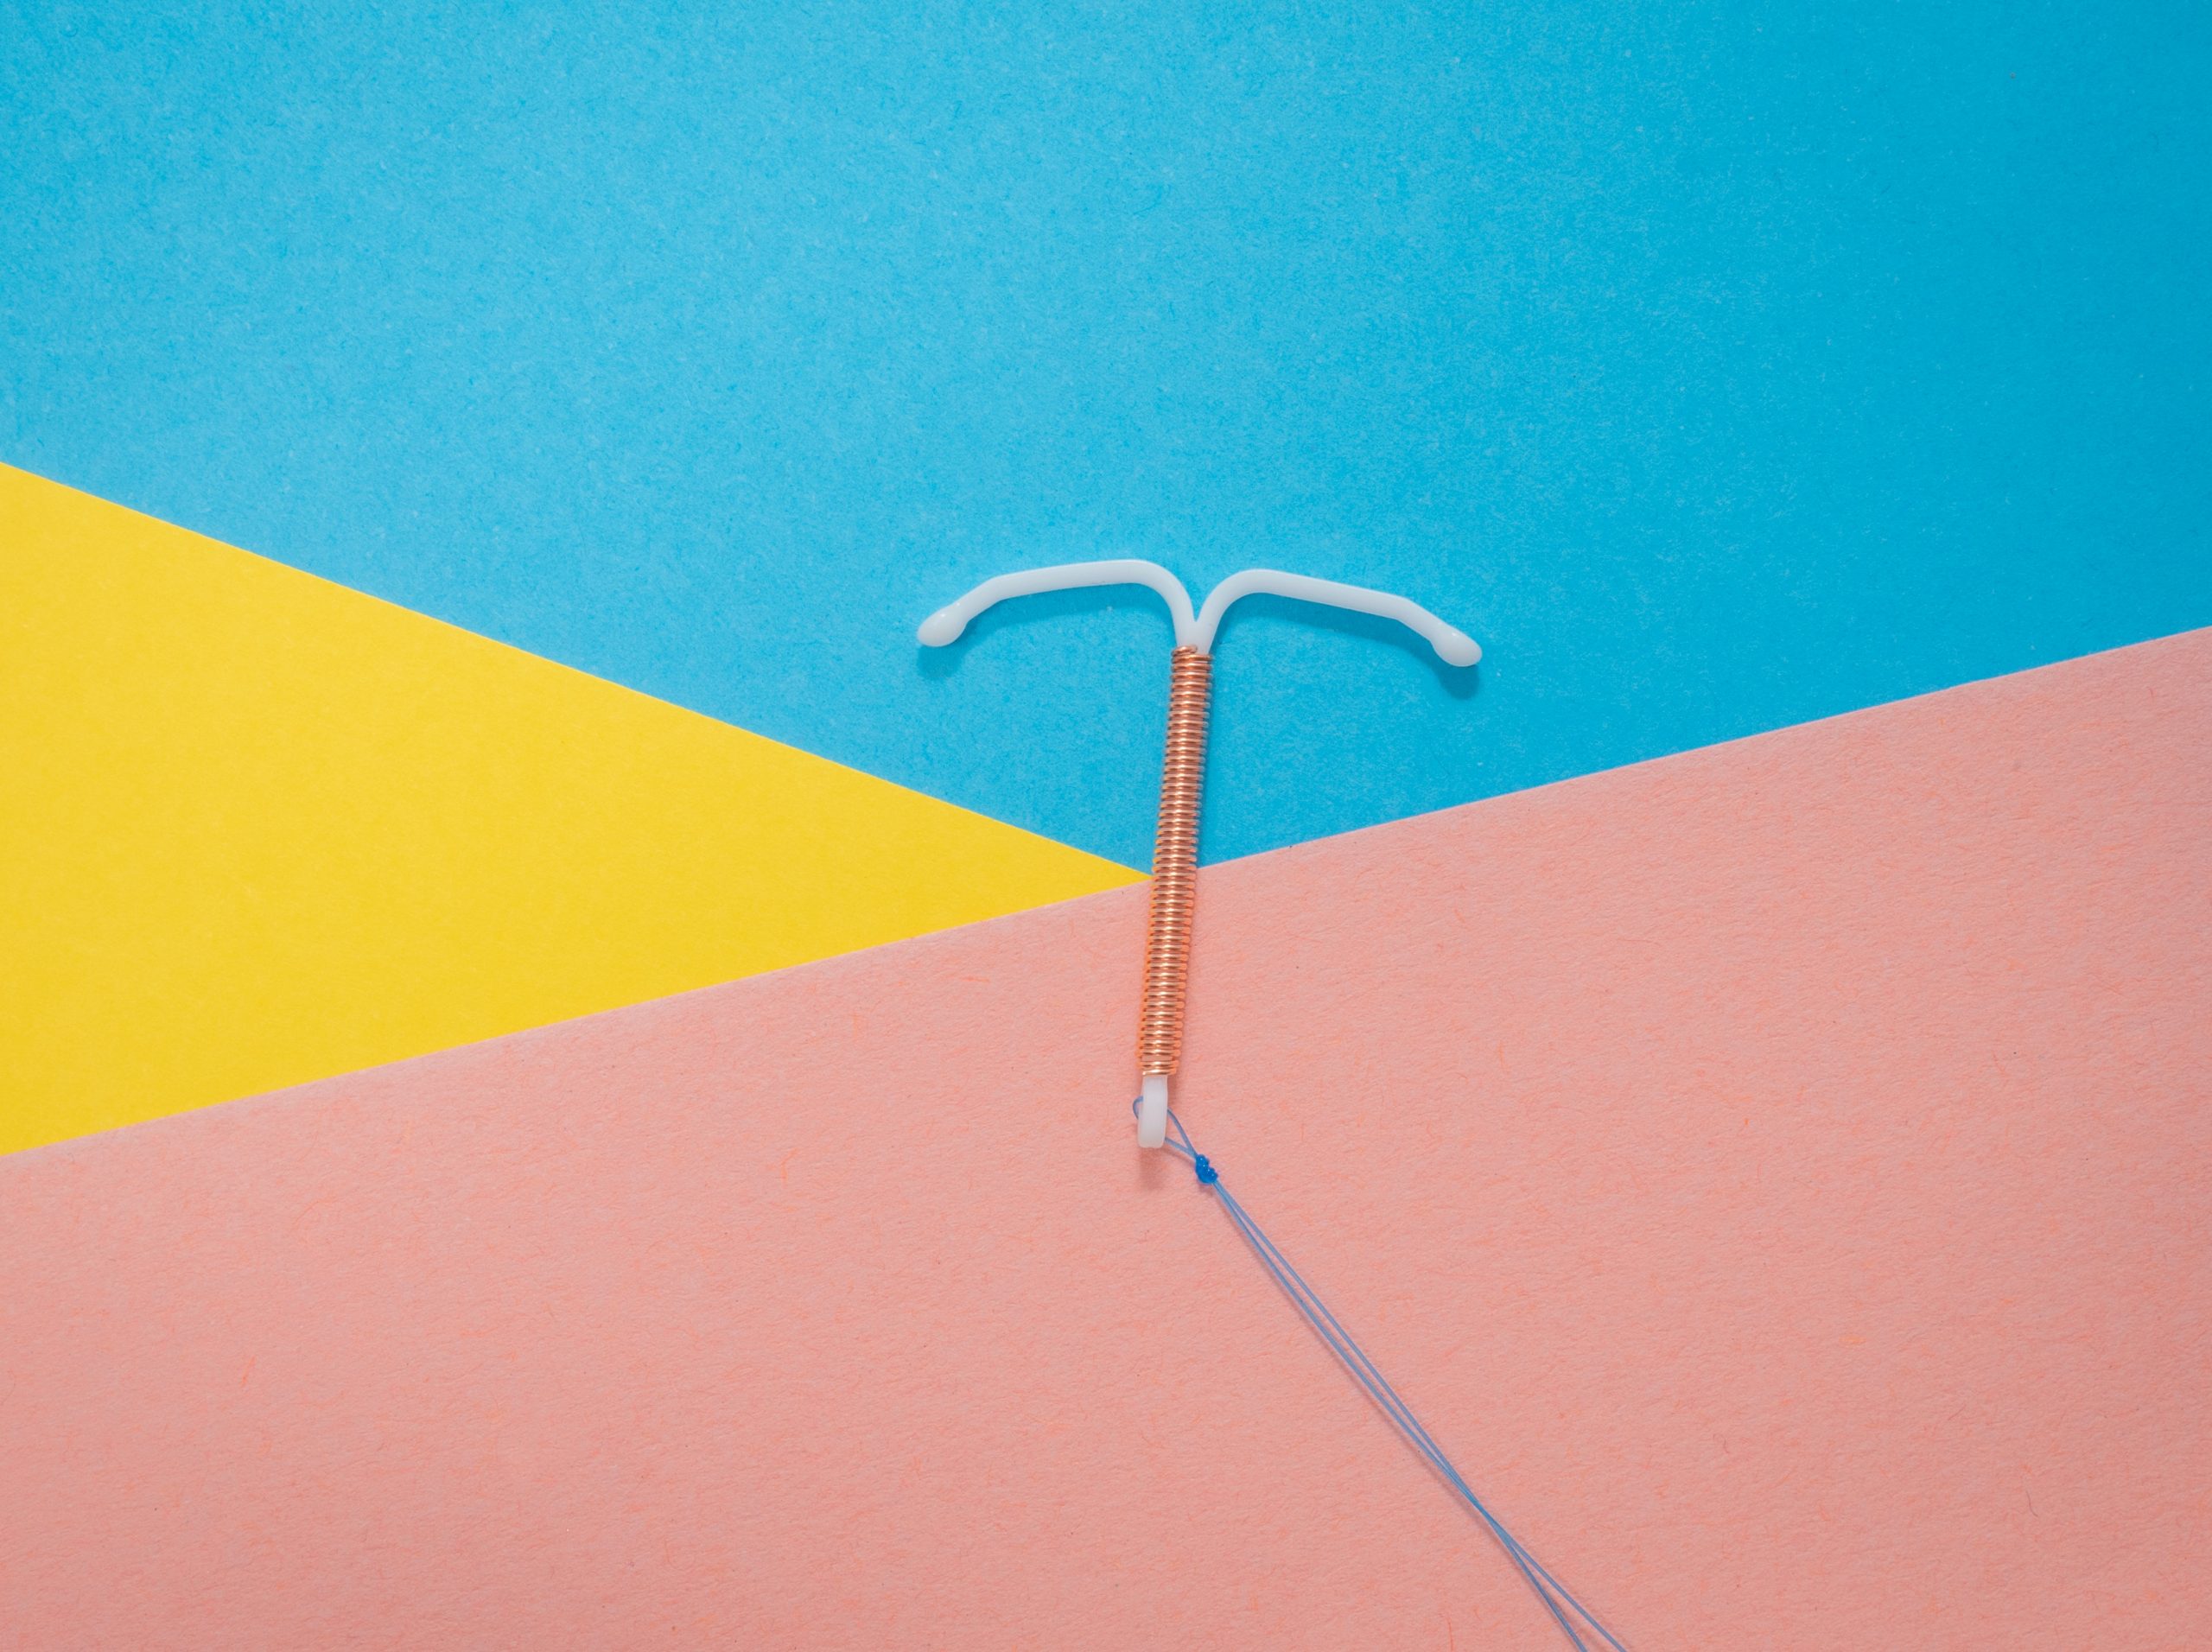 A picture of an intrauterine device (IUD), otherwise known as the coil